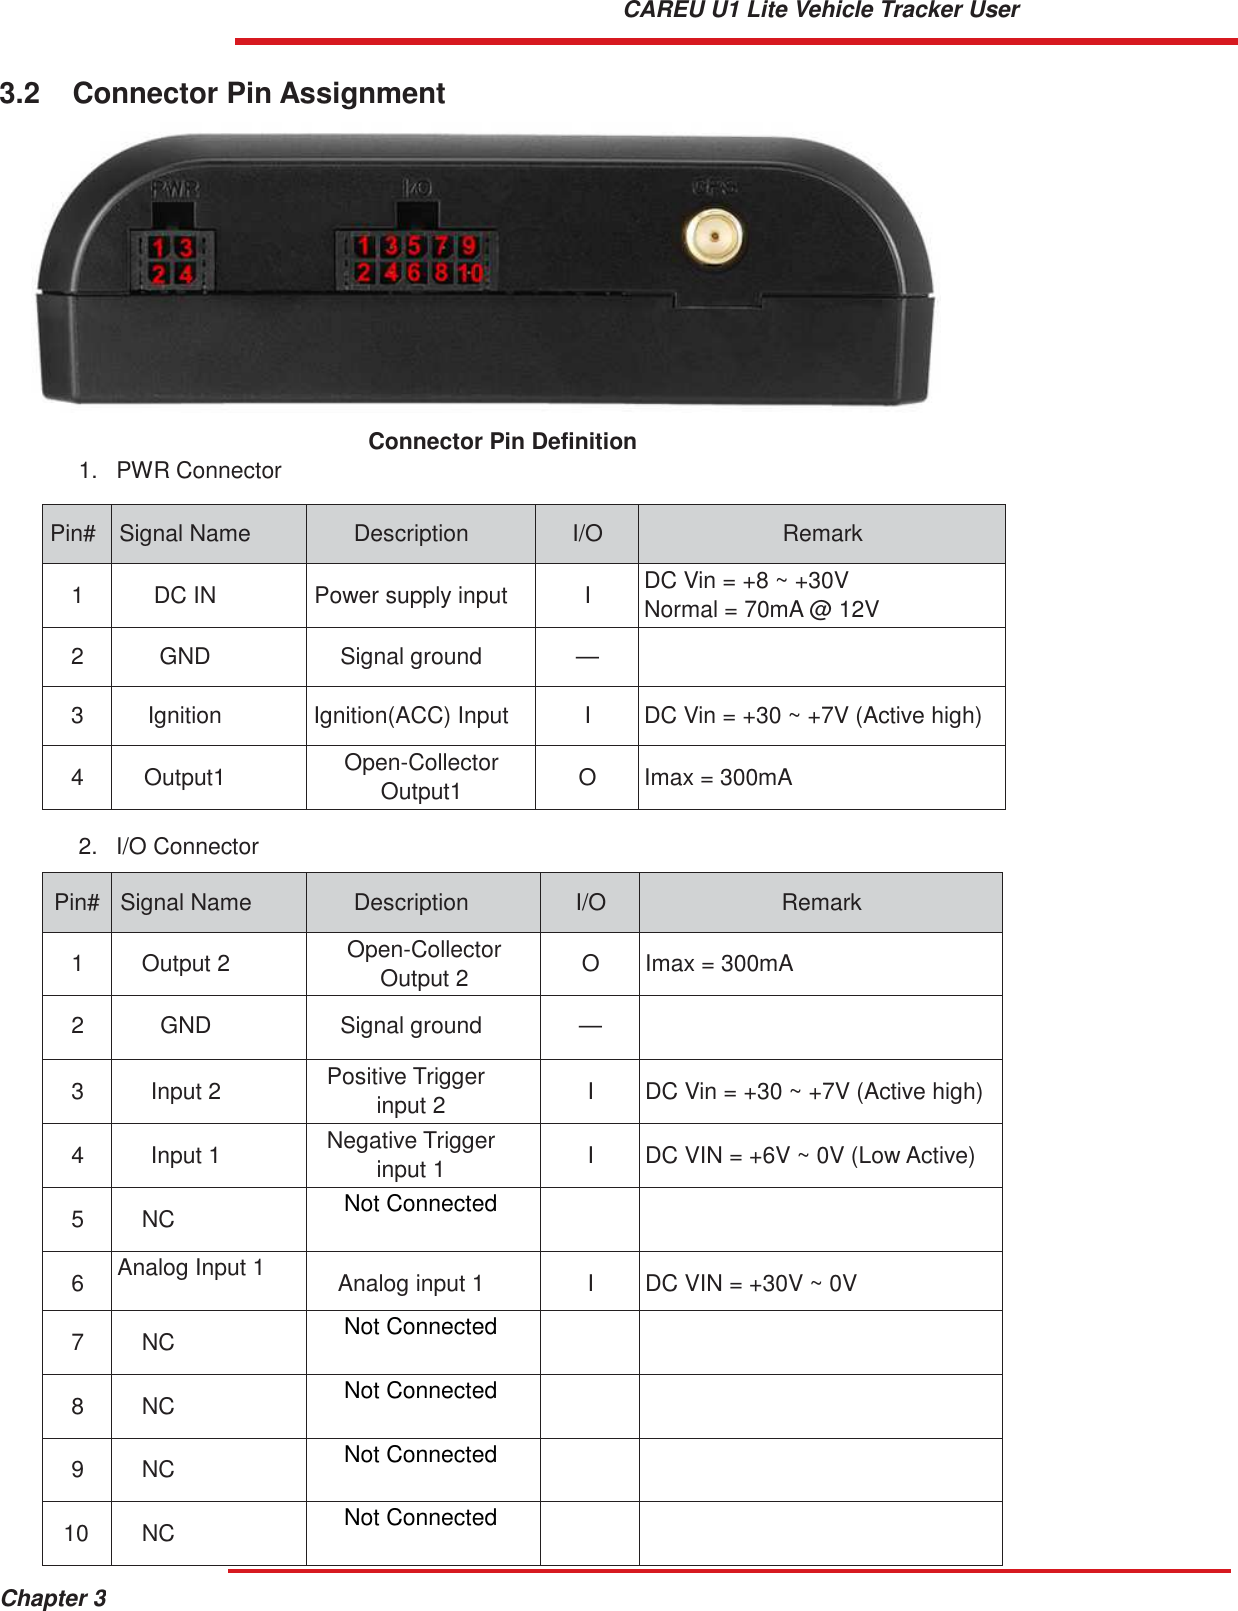 Chapter 3 CAREU U1 Lite Vehicle Tracker User   3.2  Connector Pin Assignment                Connector Pin Definition 1.   PWR Connector   Pin#  Signal Name  Description  I/O  Remark  1  DC IN  Power supply input  I DC Vin = +8 ~ +30V Normal = 70mA @ 12V  2  GND  Signal ground  —   3  Ignition  Ignition(ACC) Input  I  DC Vin = +30 ~ +7V (Active high)  4  Output1 Open-Collector Output1  O  Imax = 300mA  2.   I/O Connector   Pin#  Signal Name  Description  I/O  Remark  1  Output 2 Open-Collector Output 2  O  Imax = 300mA  2  GND  Signal ground  —   3  Input 2 Positive Trigger input 2  I  DC Vin = +30 ~ +7V (Active high)  4  Input 1 Negative Trigger input 1  I  DC VIN = +6V ~ 0V (Low Active)  5  NC Not Connected      6 Analog Input 1  Analog input 1  I  DC VIN = +30V ~ 0V  7  NC Not Connected      8  NC Not Connected      9  NC Not Connected      10  NC Not Connected     